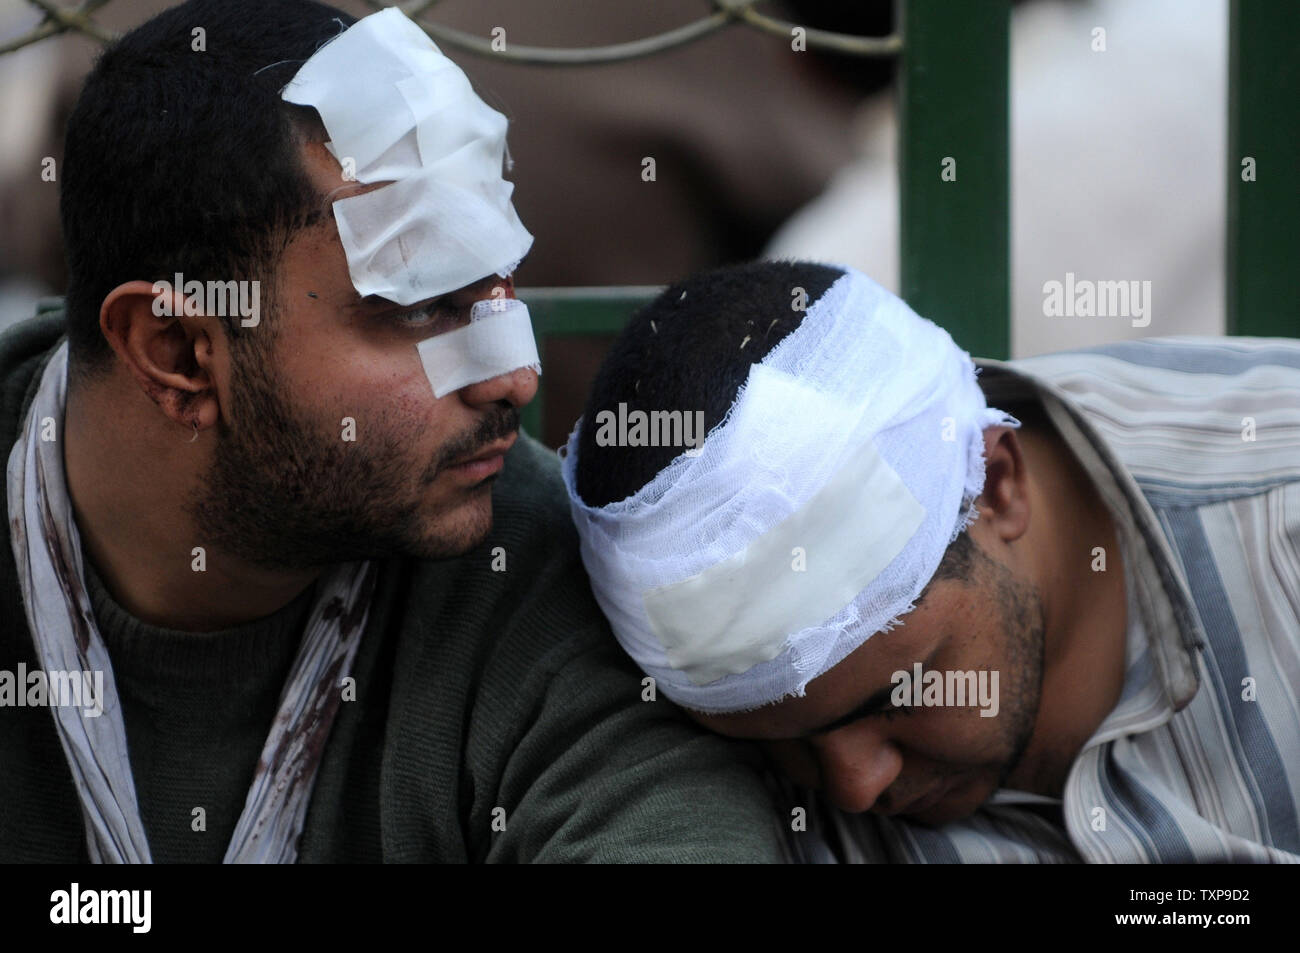 Injured Egyptian men are seen during clashes between anti-government demonstrators and their pro-government opponents in Cairo's Tahrir square on February 03, 2011. This is the 10th day of protests calling for the ouster of embattled President Hosni Mubarak.  UPI Stock Photo